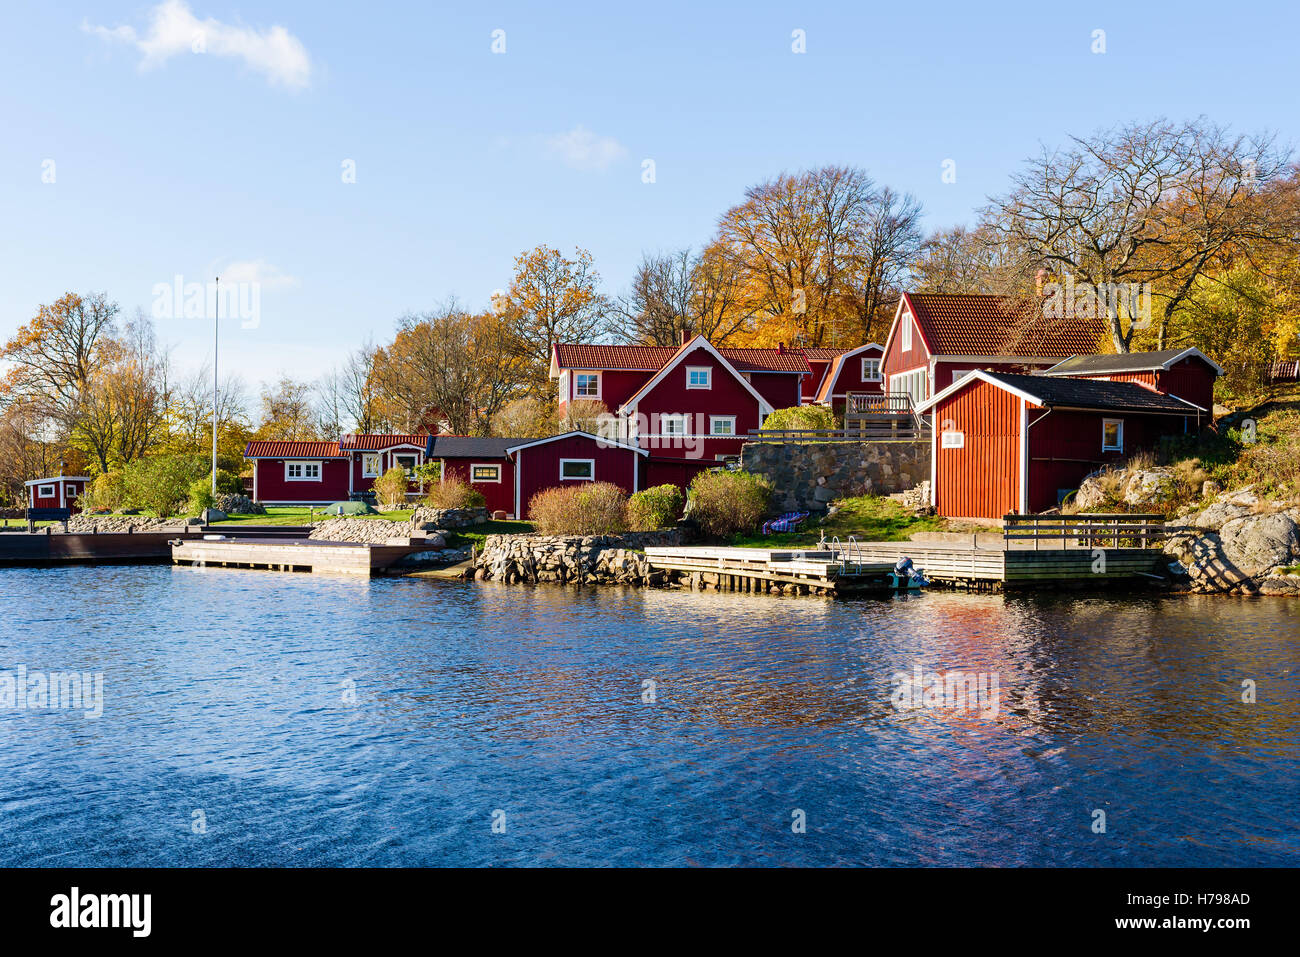 Bokevik, Sweden - October 29, 2016: Environmental documentary of coastal lifestyle. Red wooden seaside homes with private piers Stock Photo